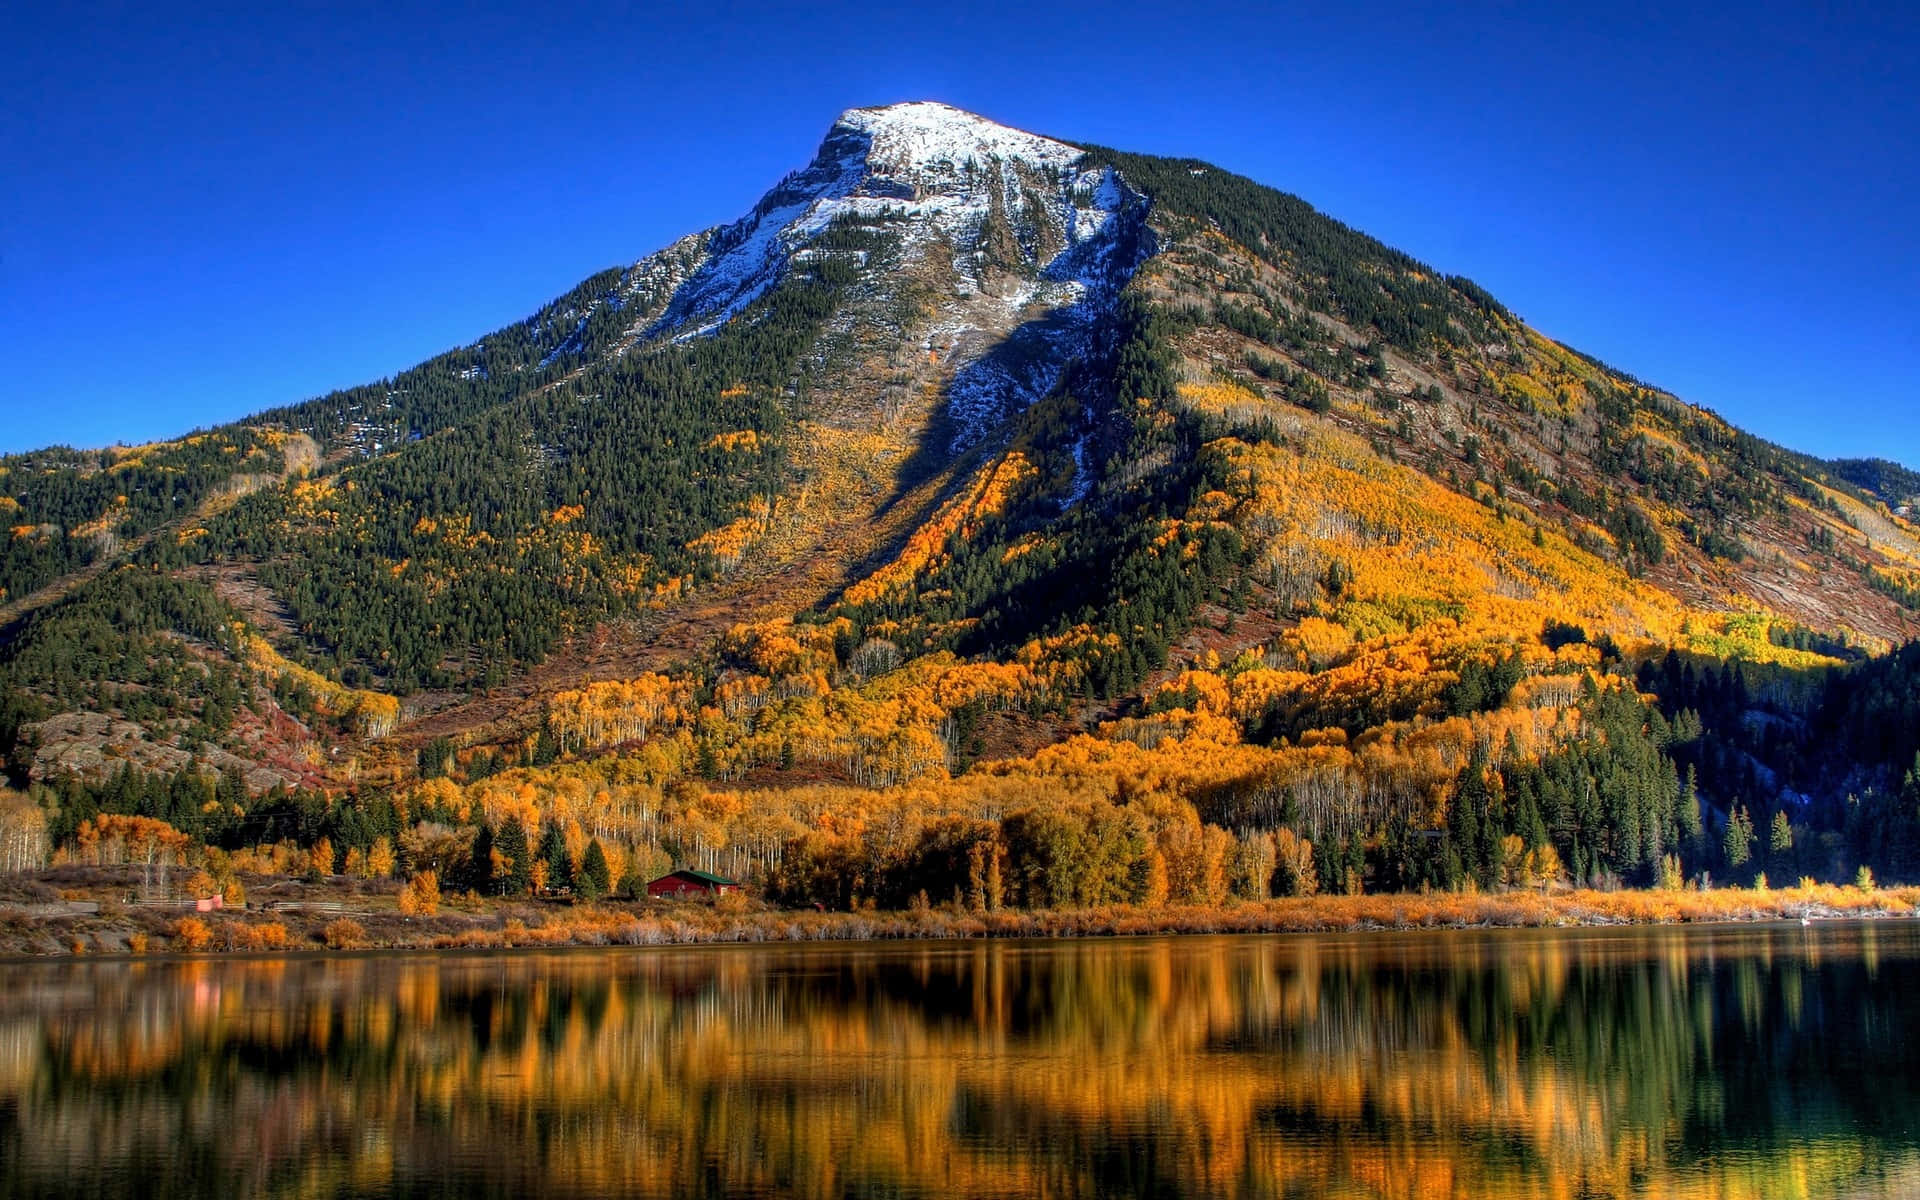 A View of the Majestic Fall Mountain Wallpaper